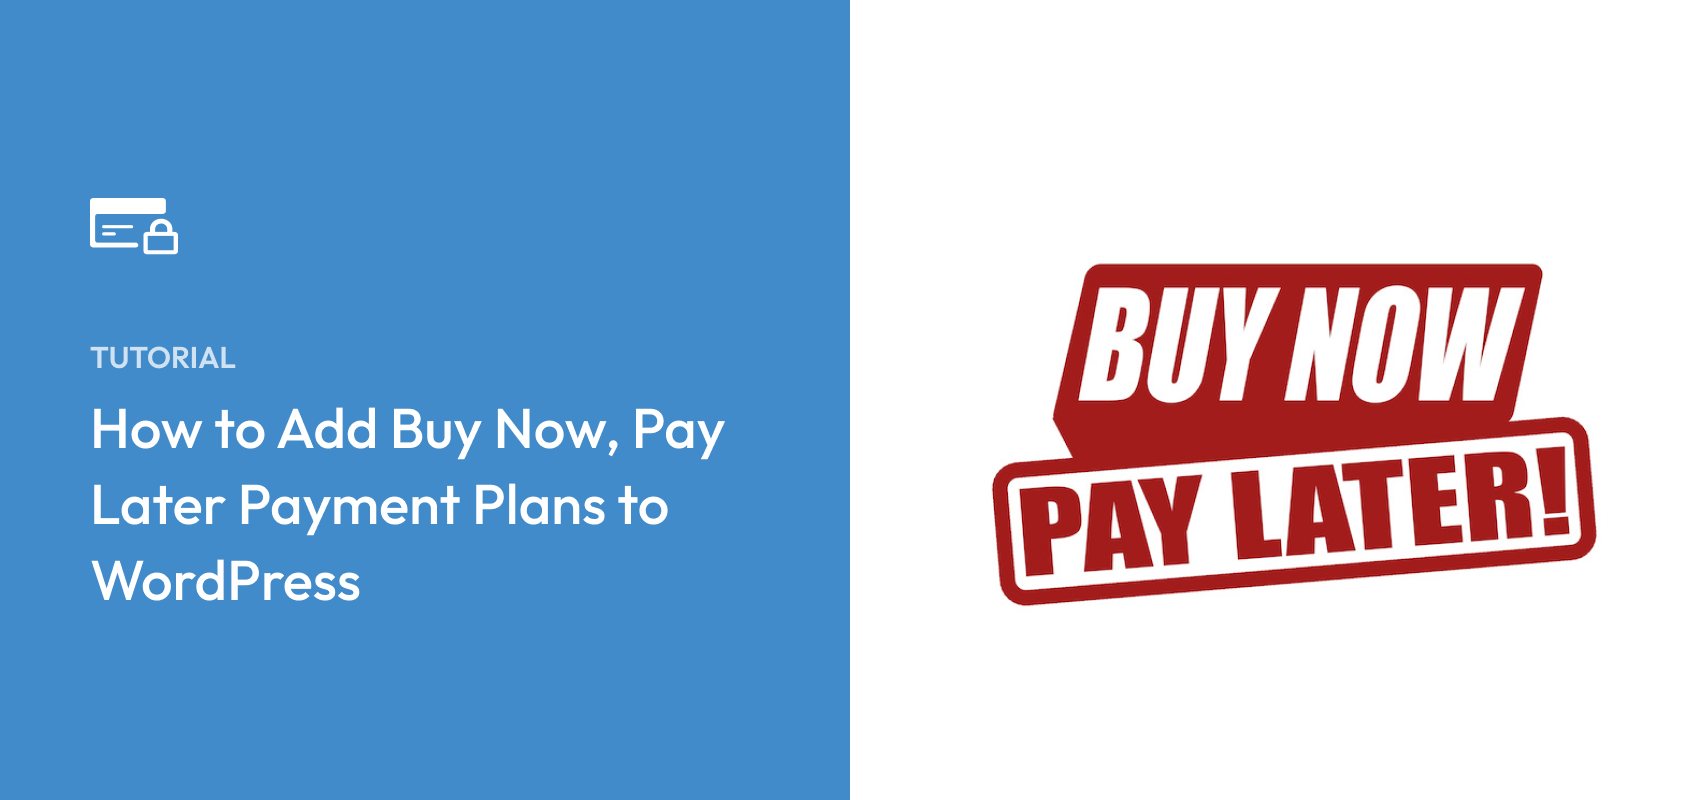 How to Add Buy Now, Pay Later Payment Plans to WordPress